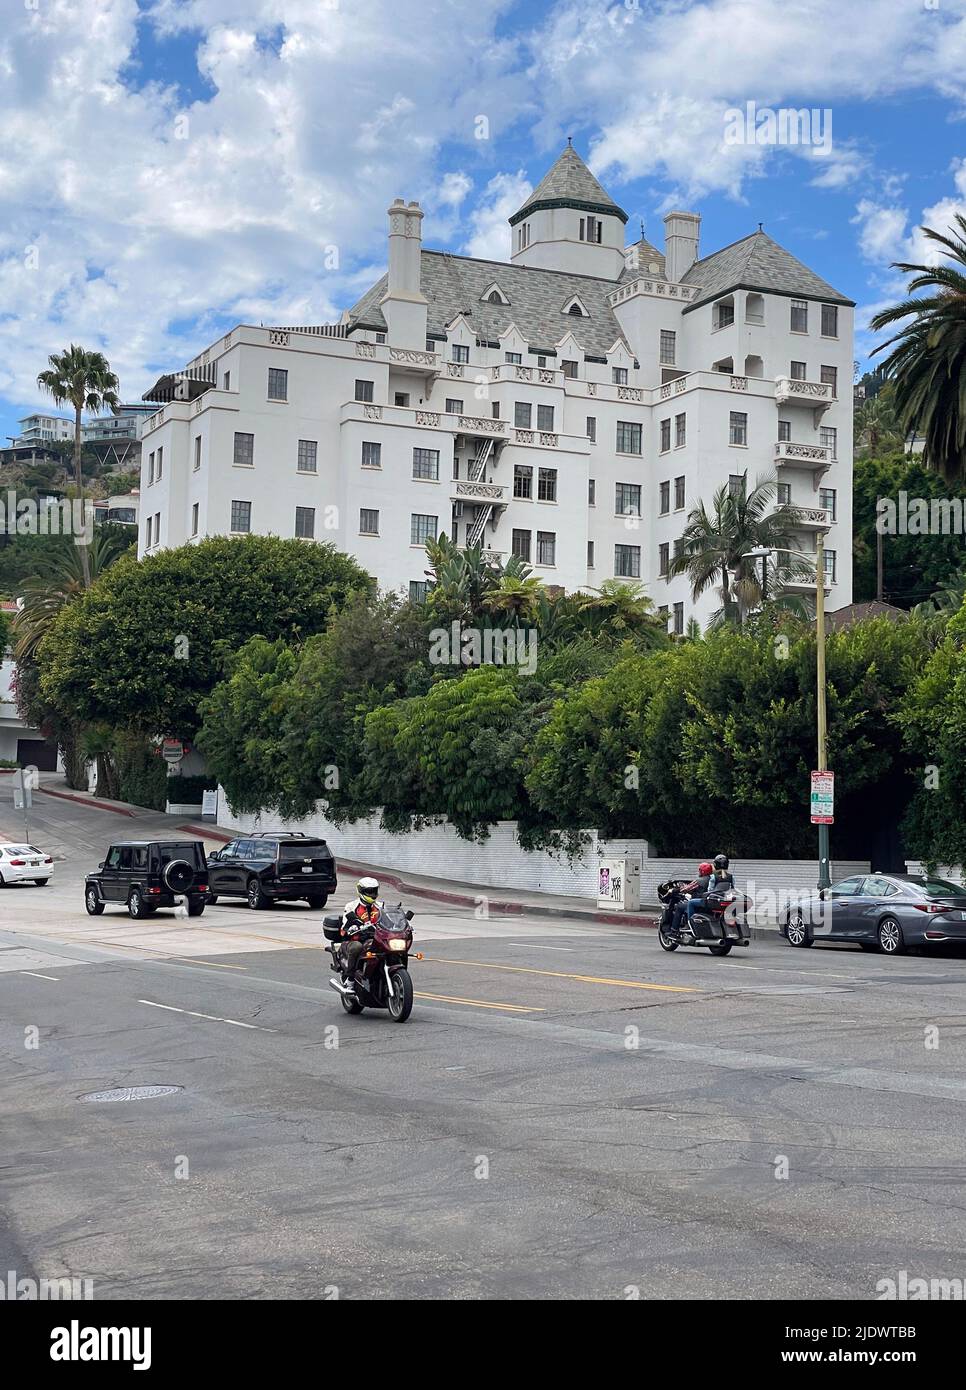 Chateau Marmont, hotel, Sunset Strip, West Hollywood, Los Angeles Foto Stock